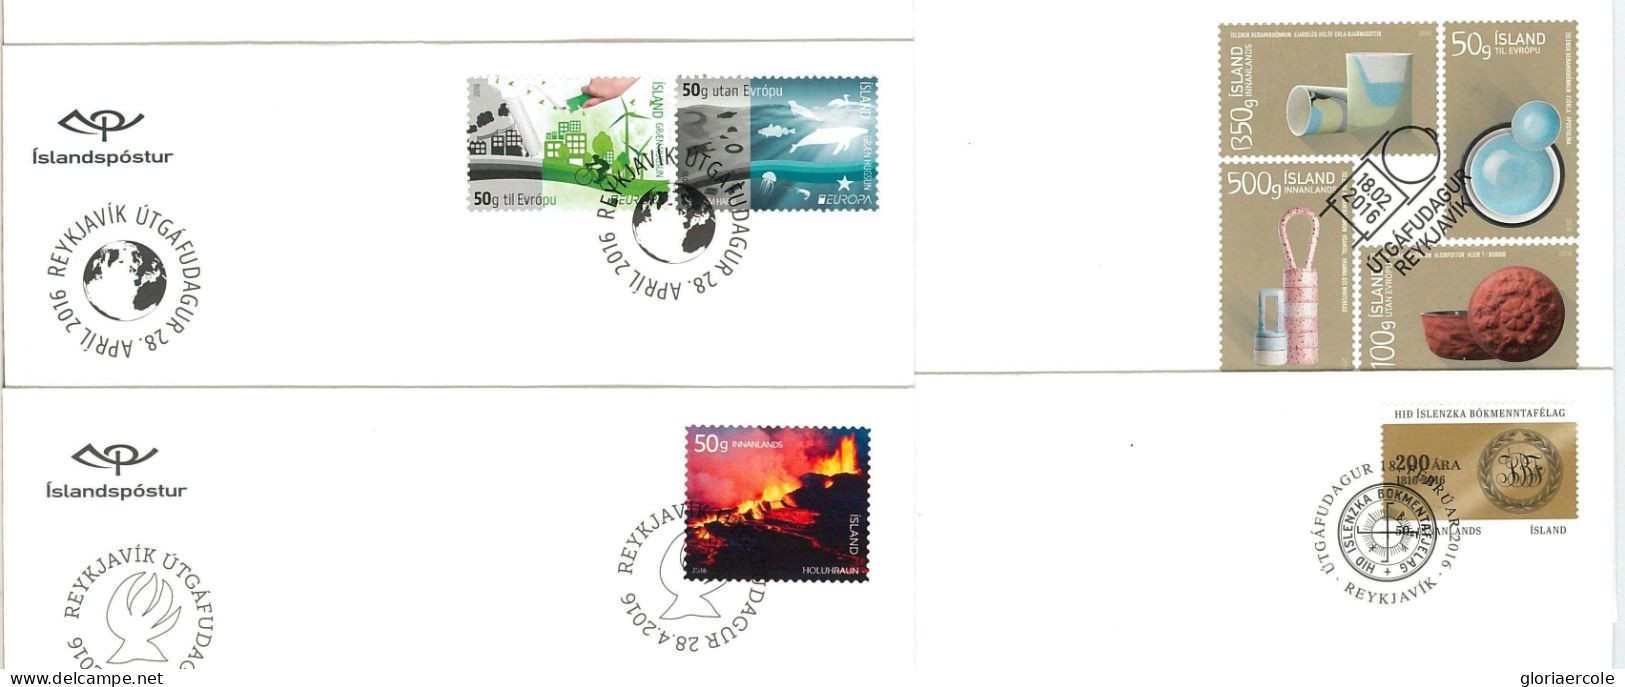 58171 - ISLAND Iceland - POSTAL HISTORY: 2016 Set Of 9  FDC COVERS - BUTTERFLIES - FDC